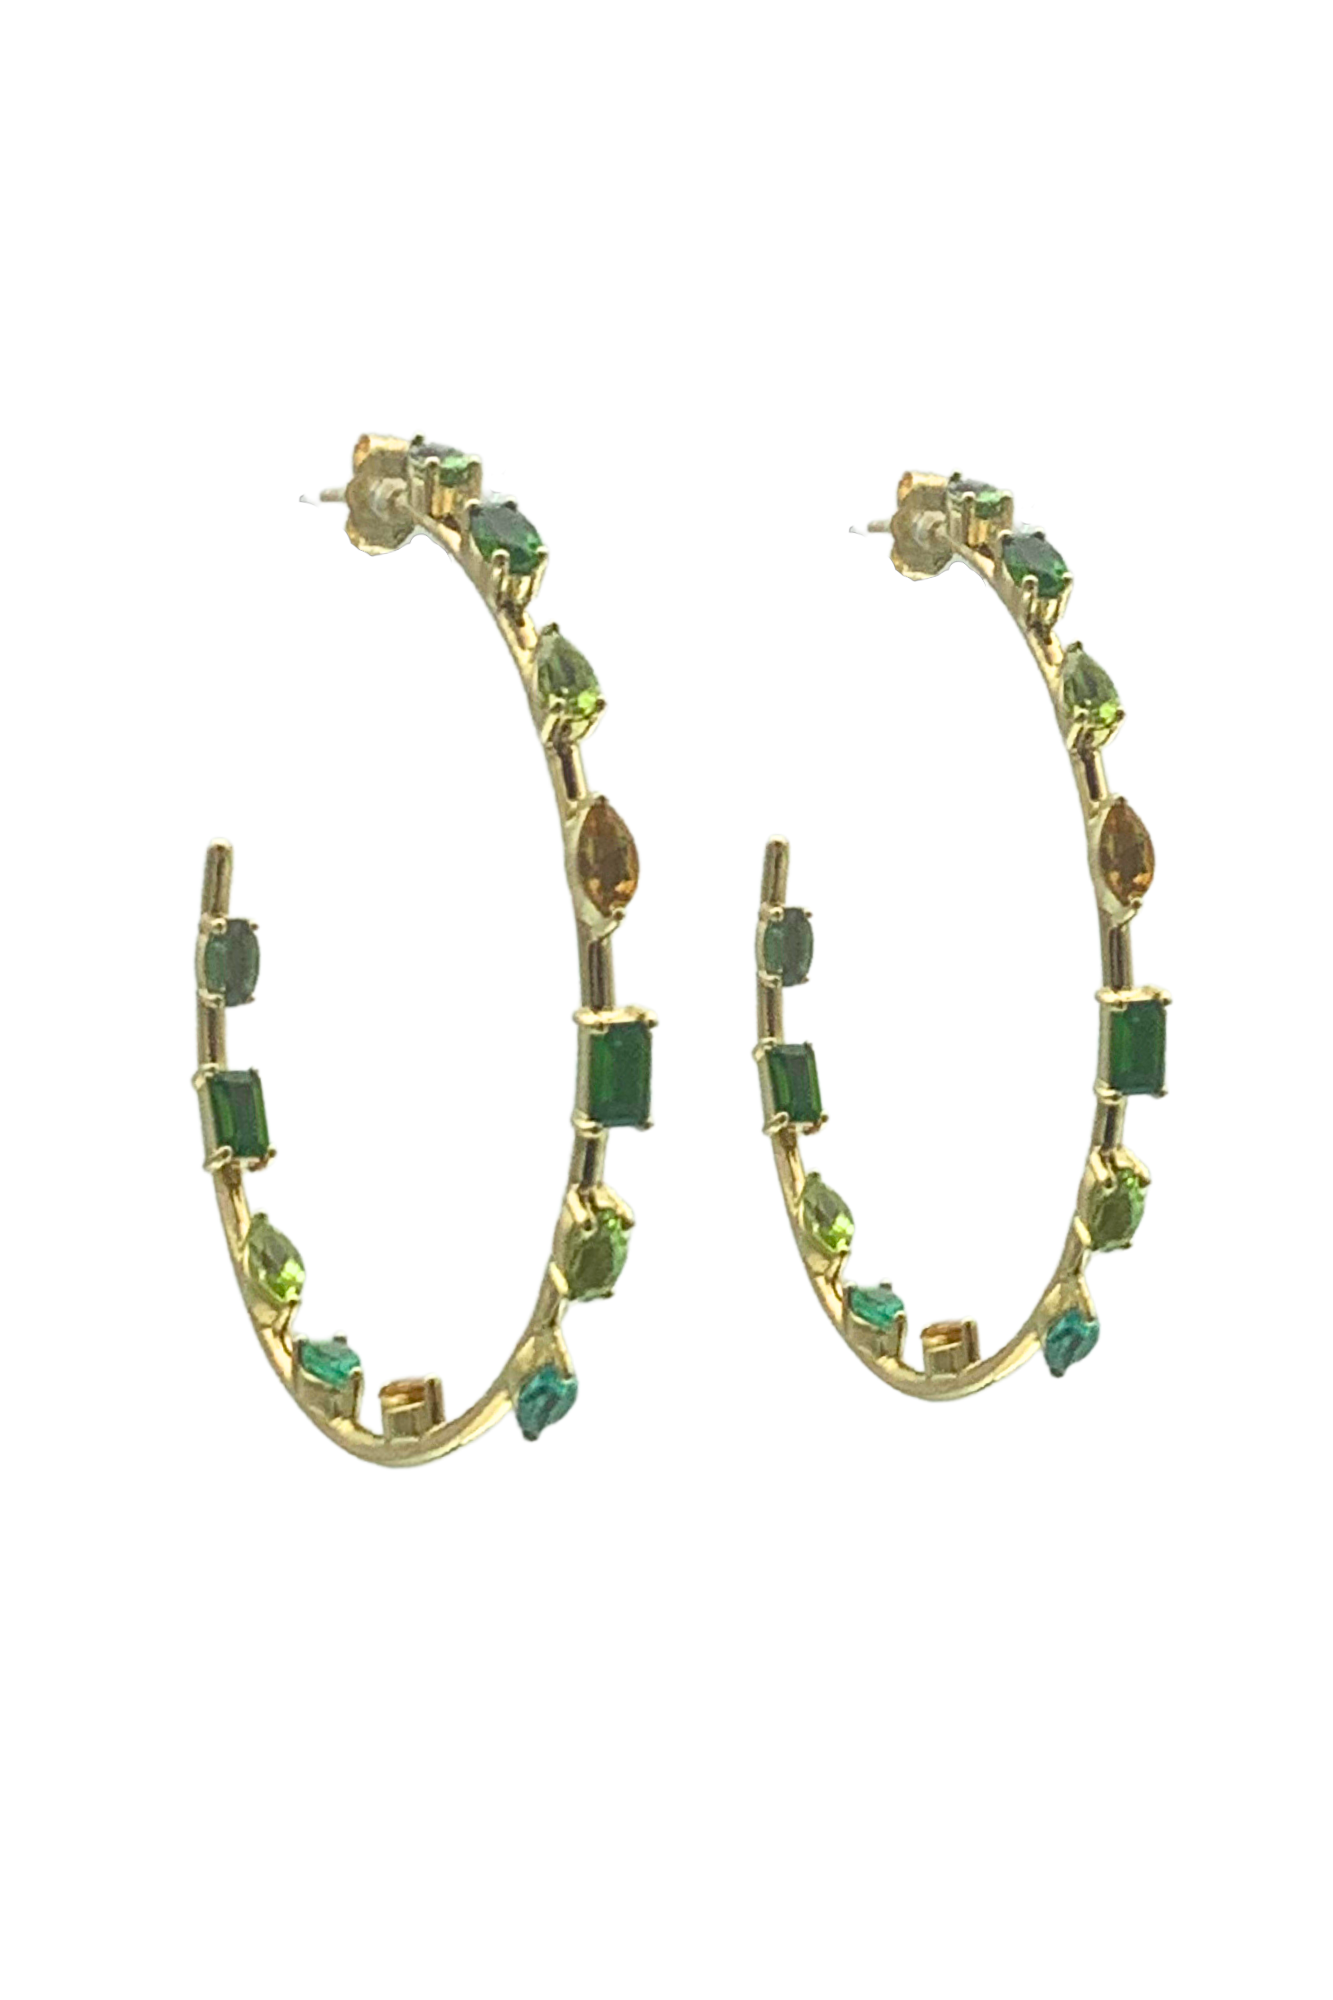 Add a bit of sophisticate style to your look with these beautiful Large Goddess Hoops from Eden Presley.